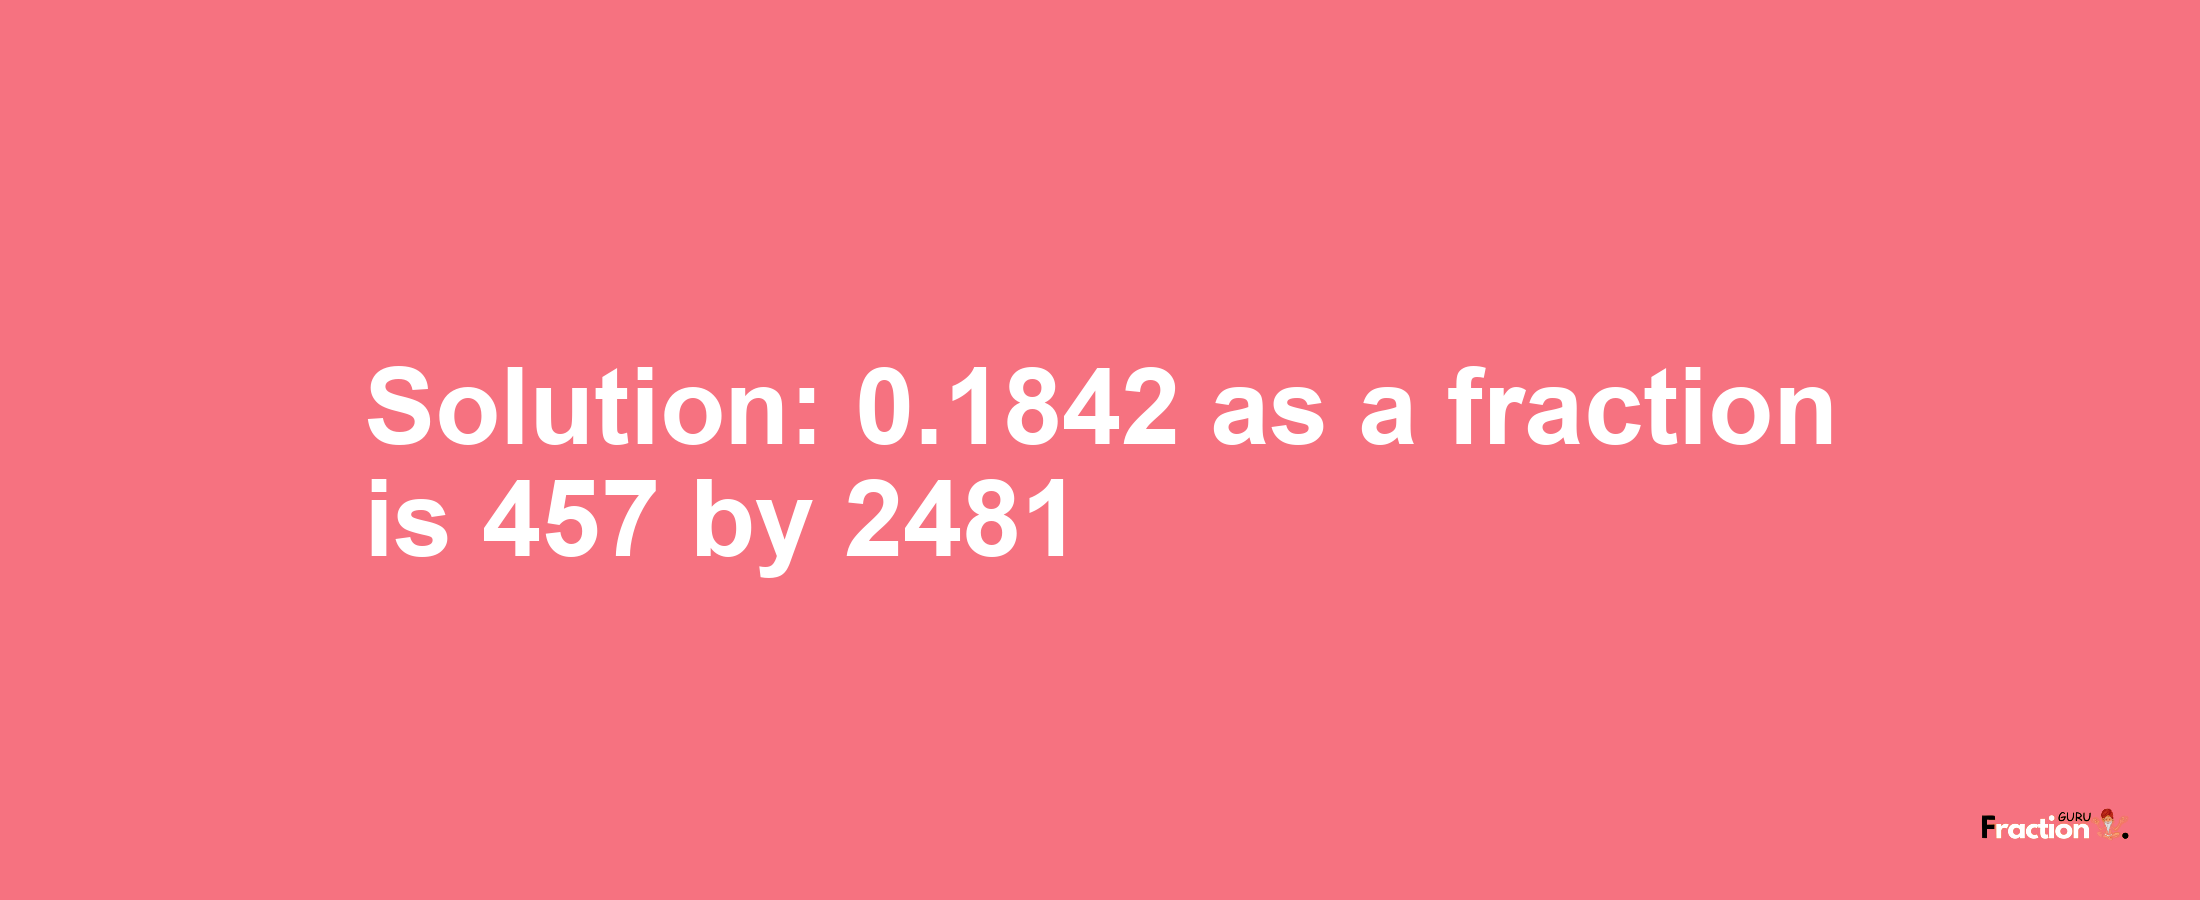 Solution:0.1842 as a fraction is 457/2481